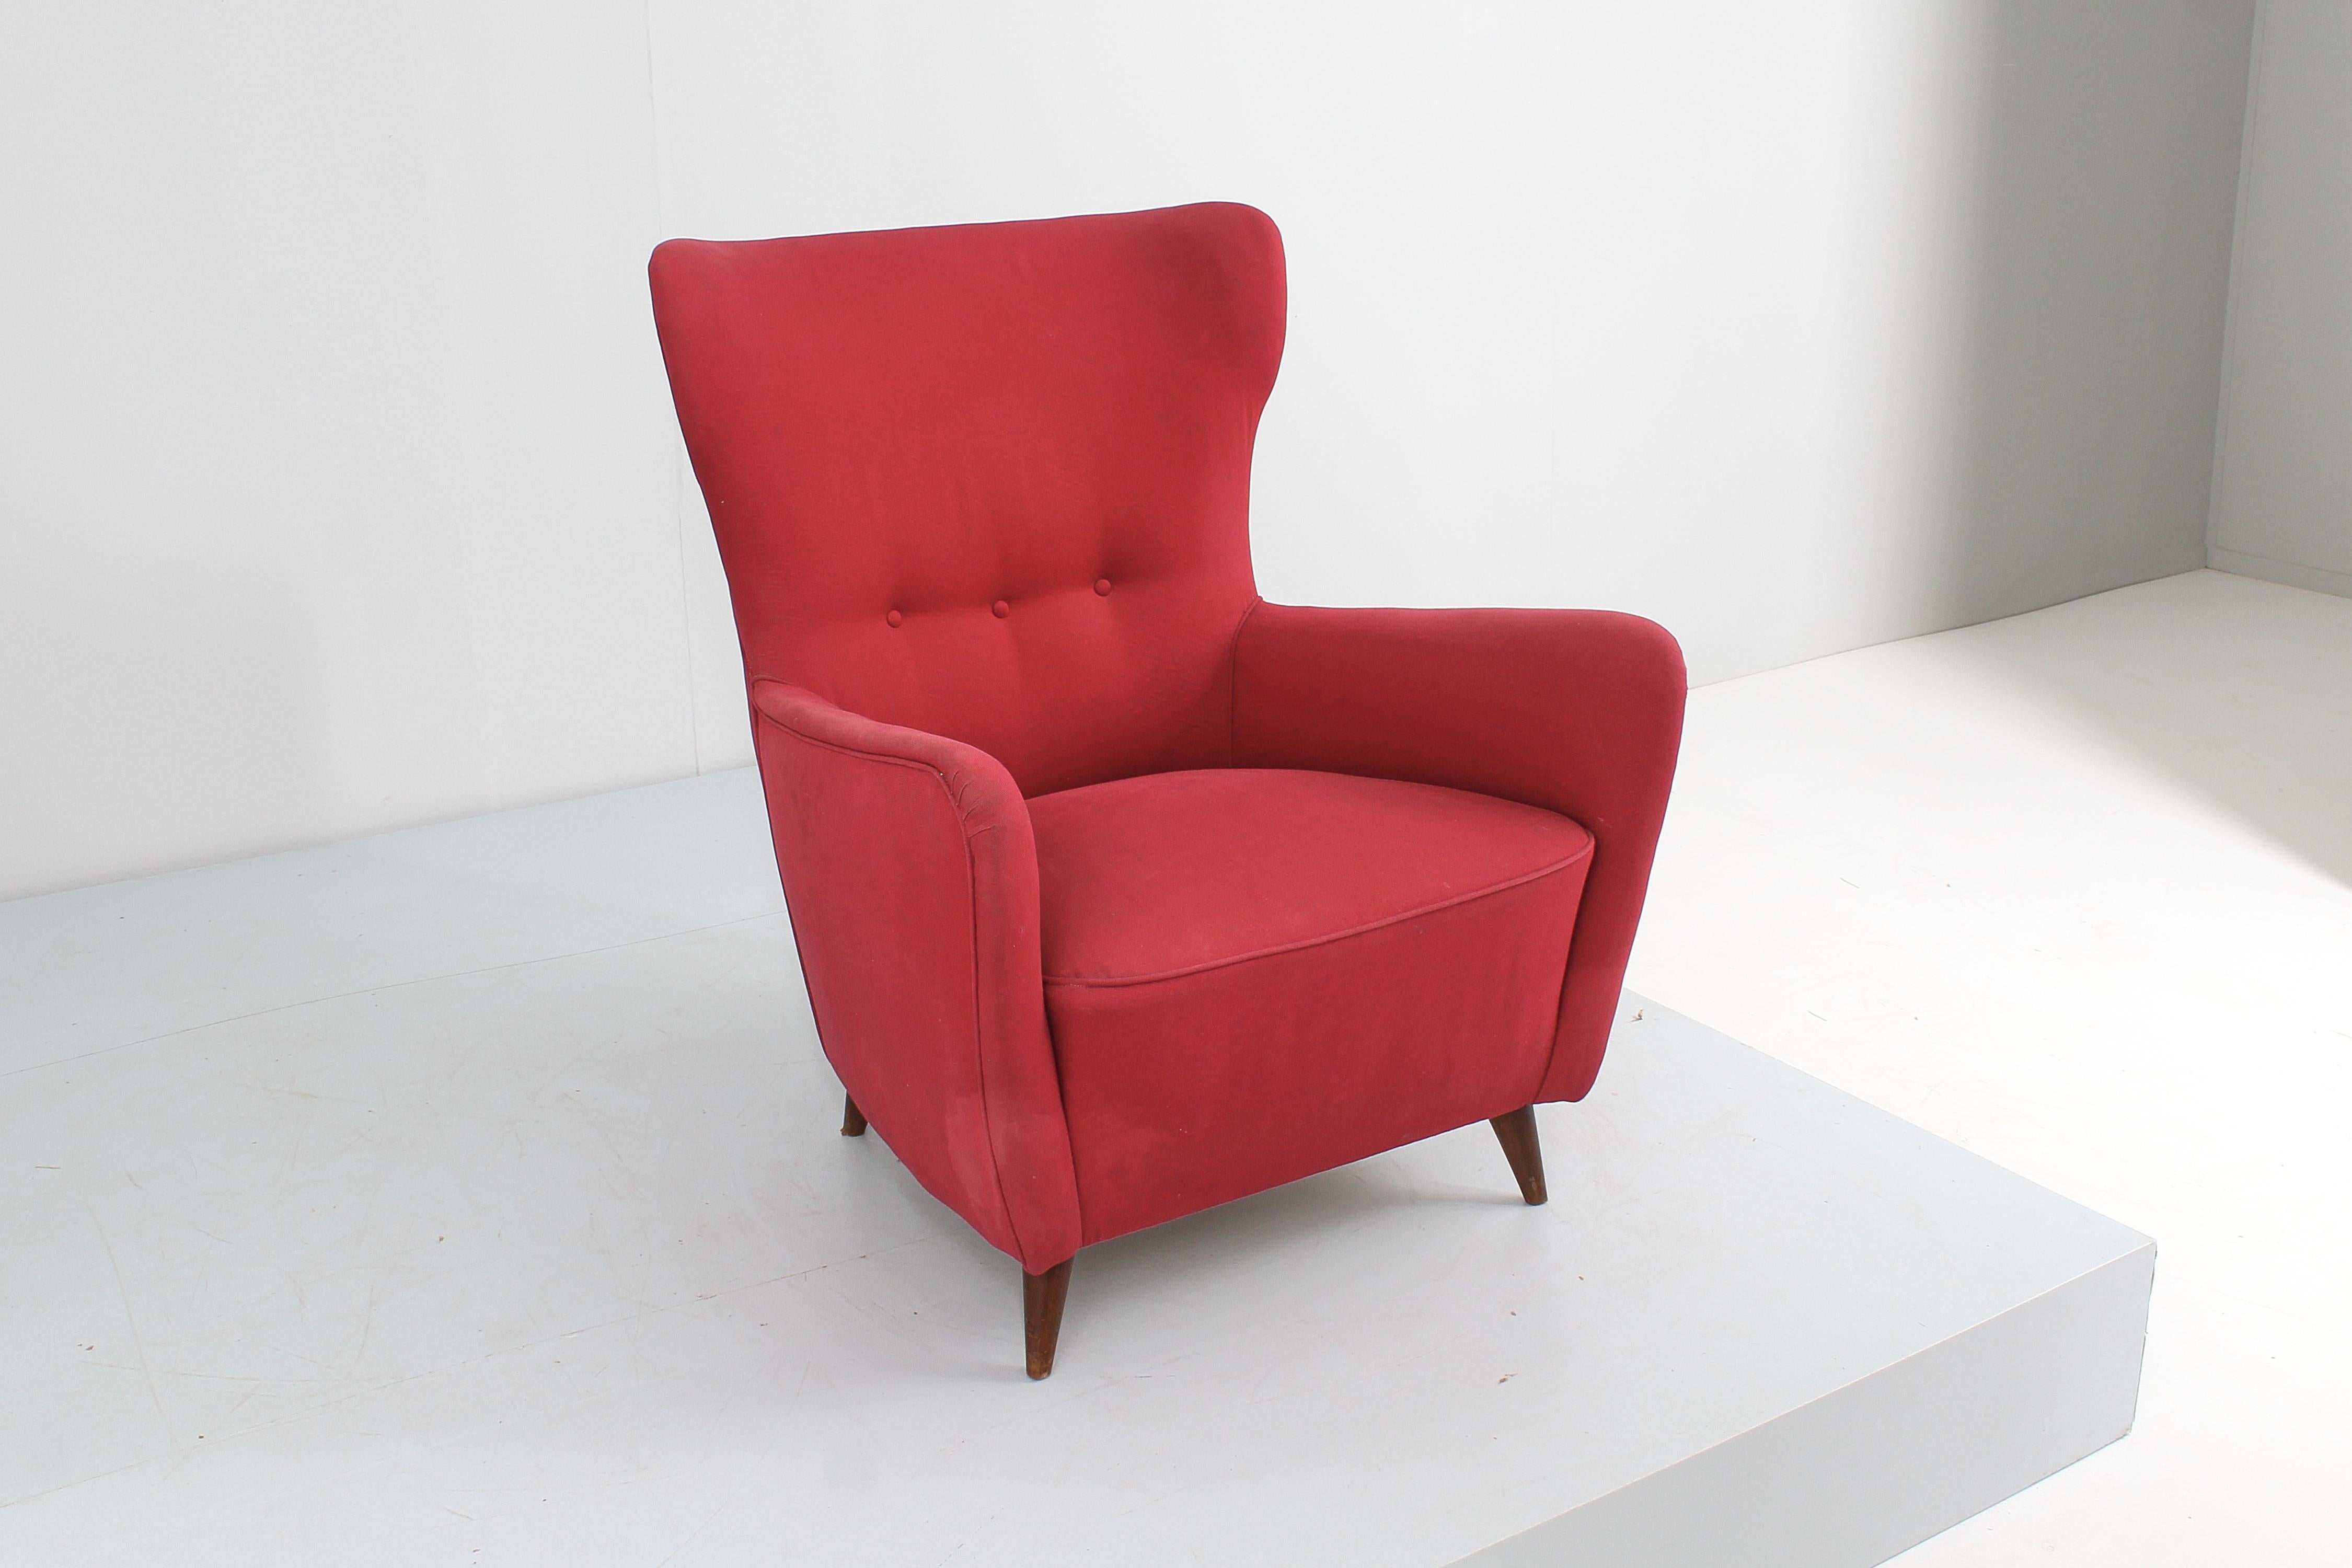 Midcentury Giò Ponti Style Wood and Red Fabric Armchair, circa 1950s Italy  For Sale 5